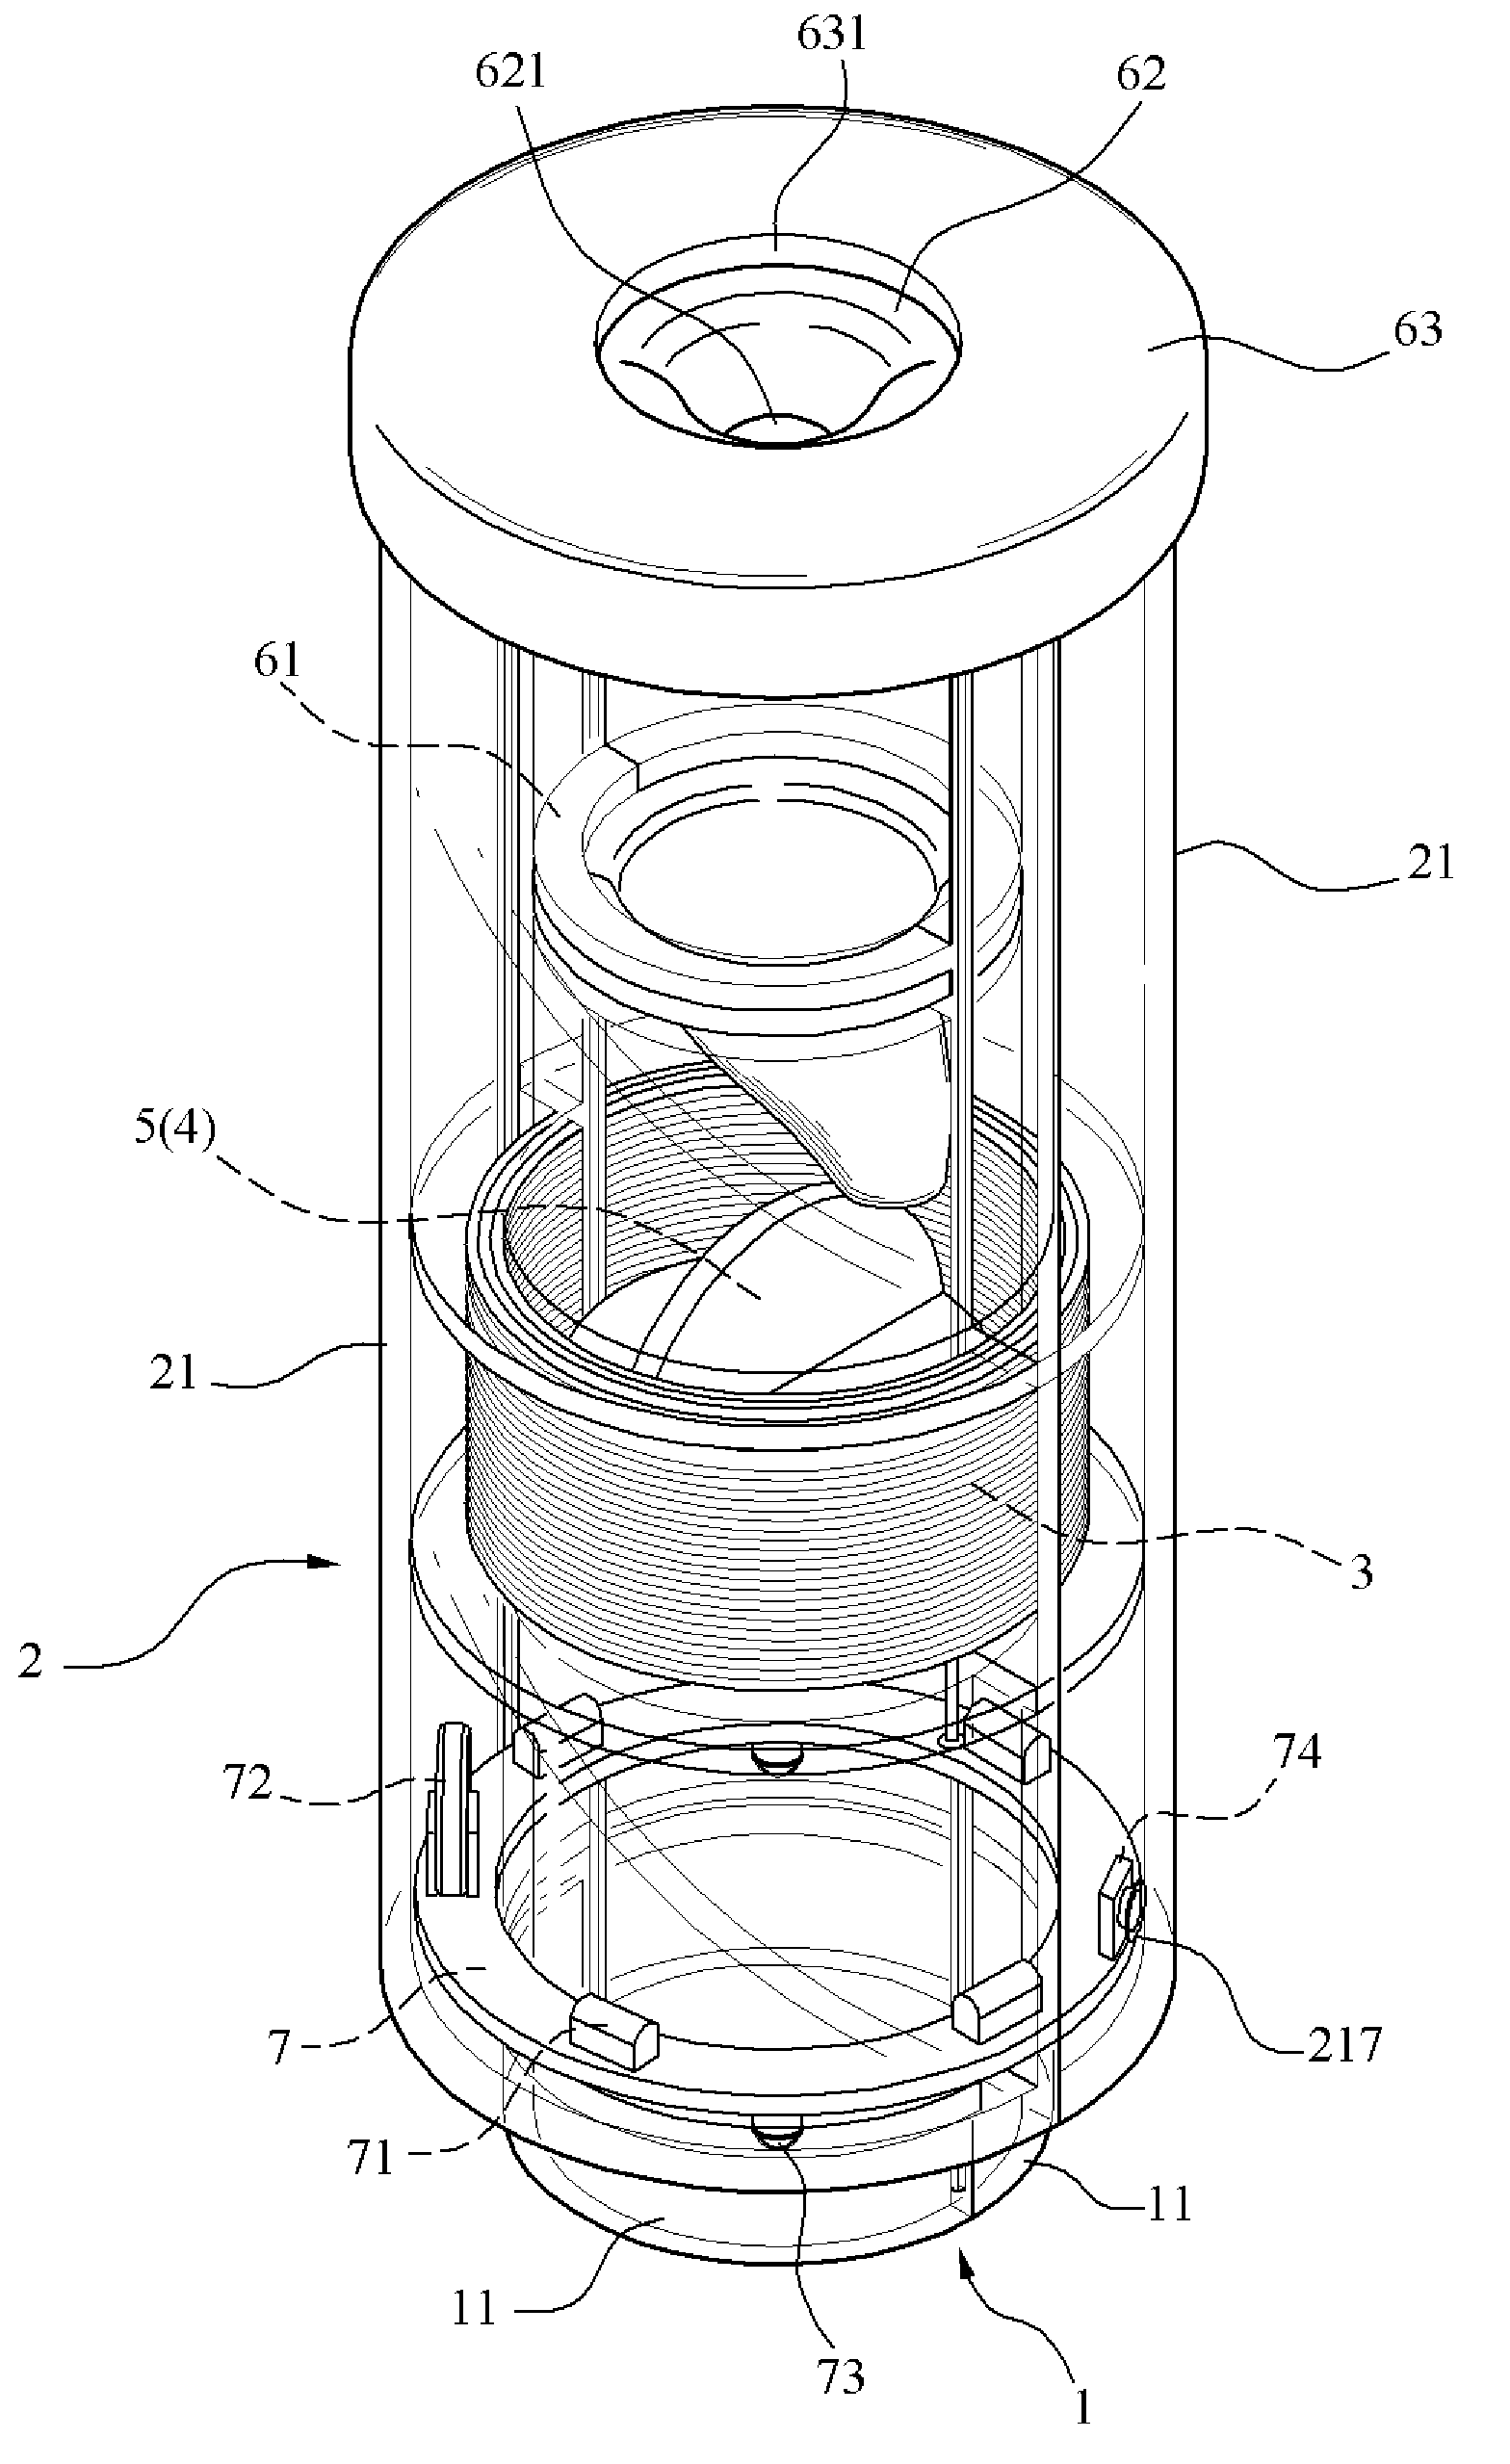 Mini-turbine driven by fluid power for electricity generation